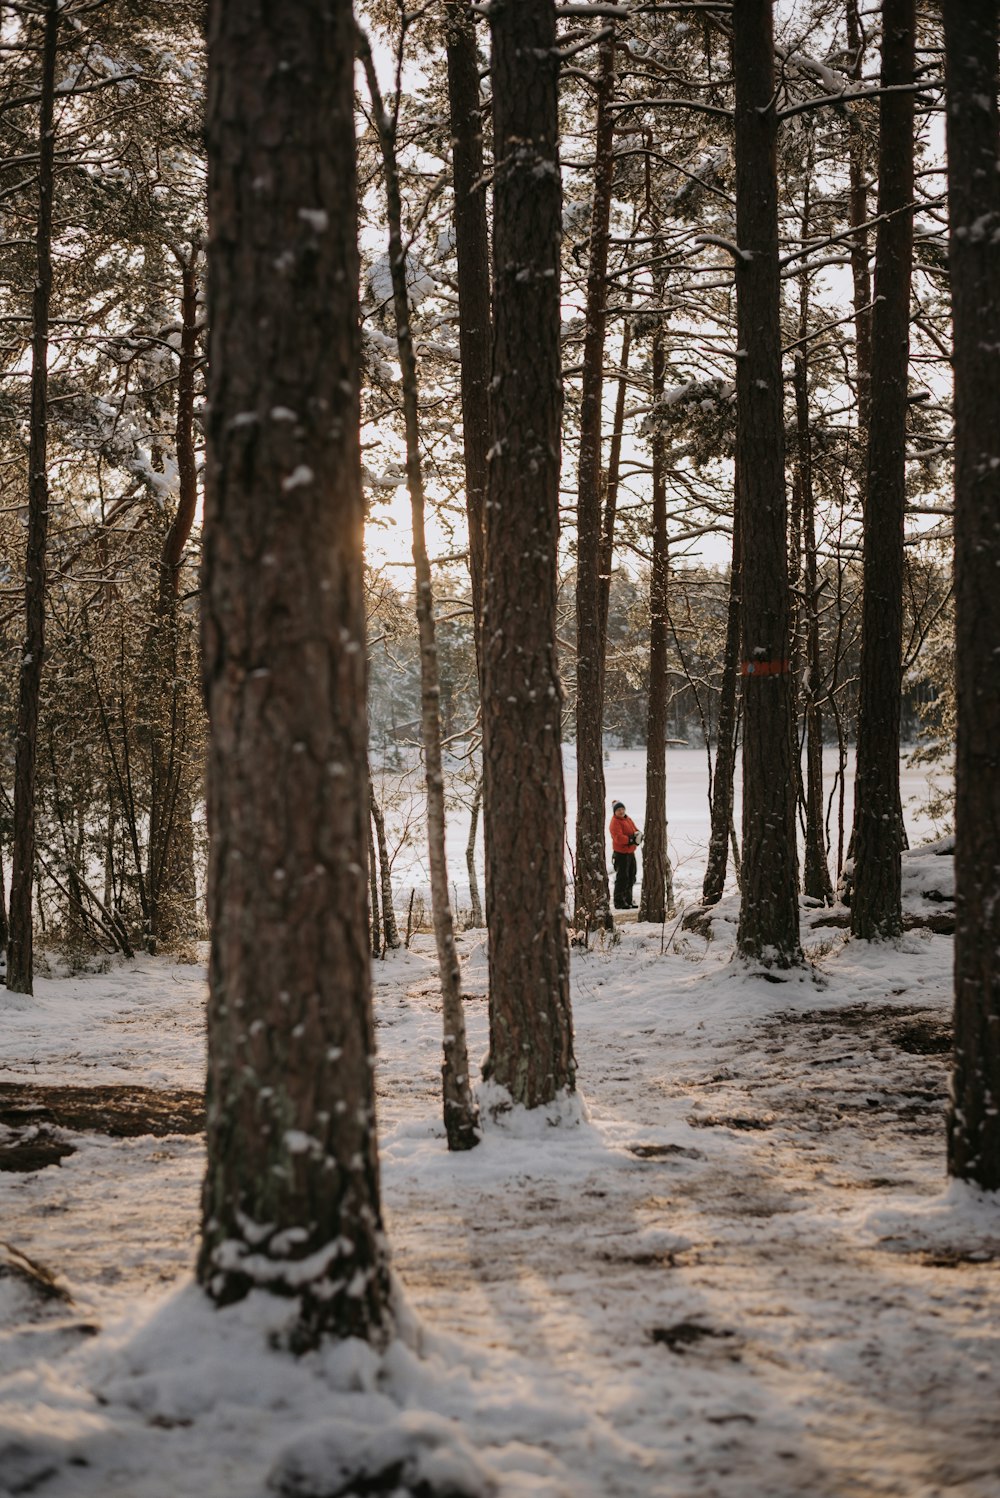 person in red jacket walking on snow covered ground in the woods during daytime